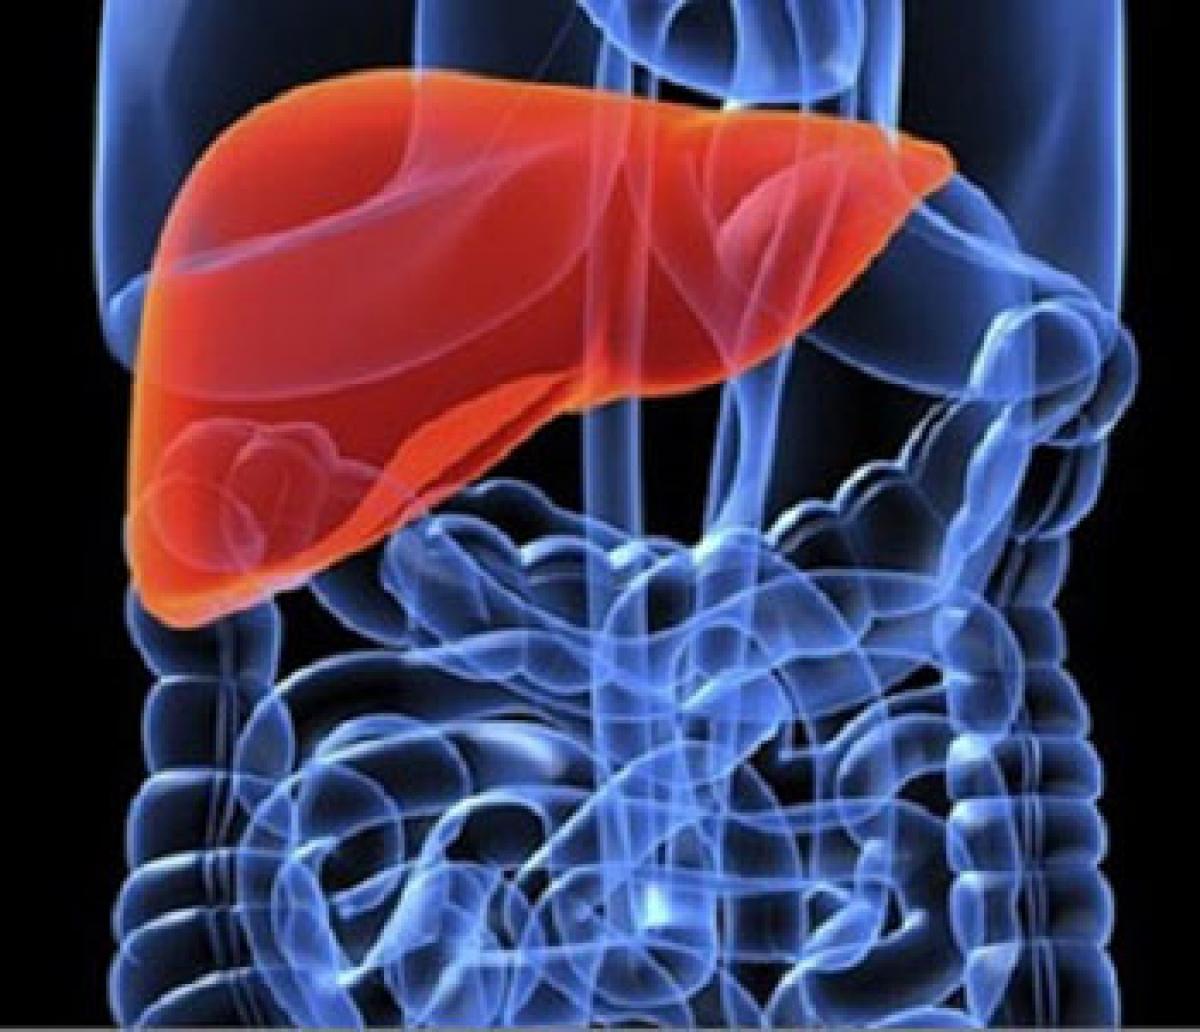 Effective therapies for liver damage come closer